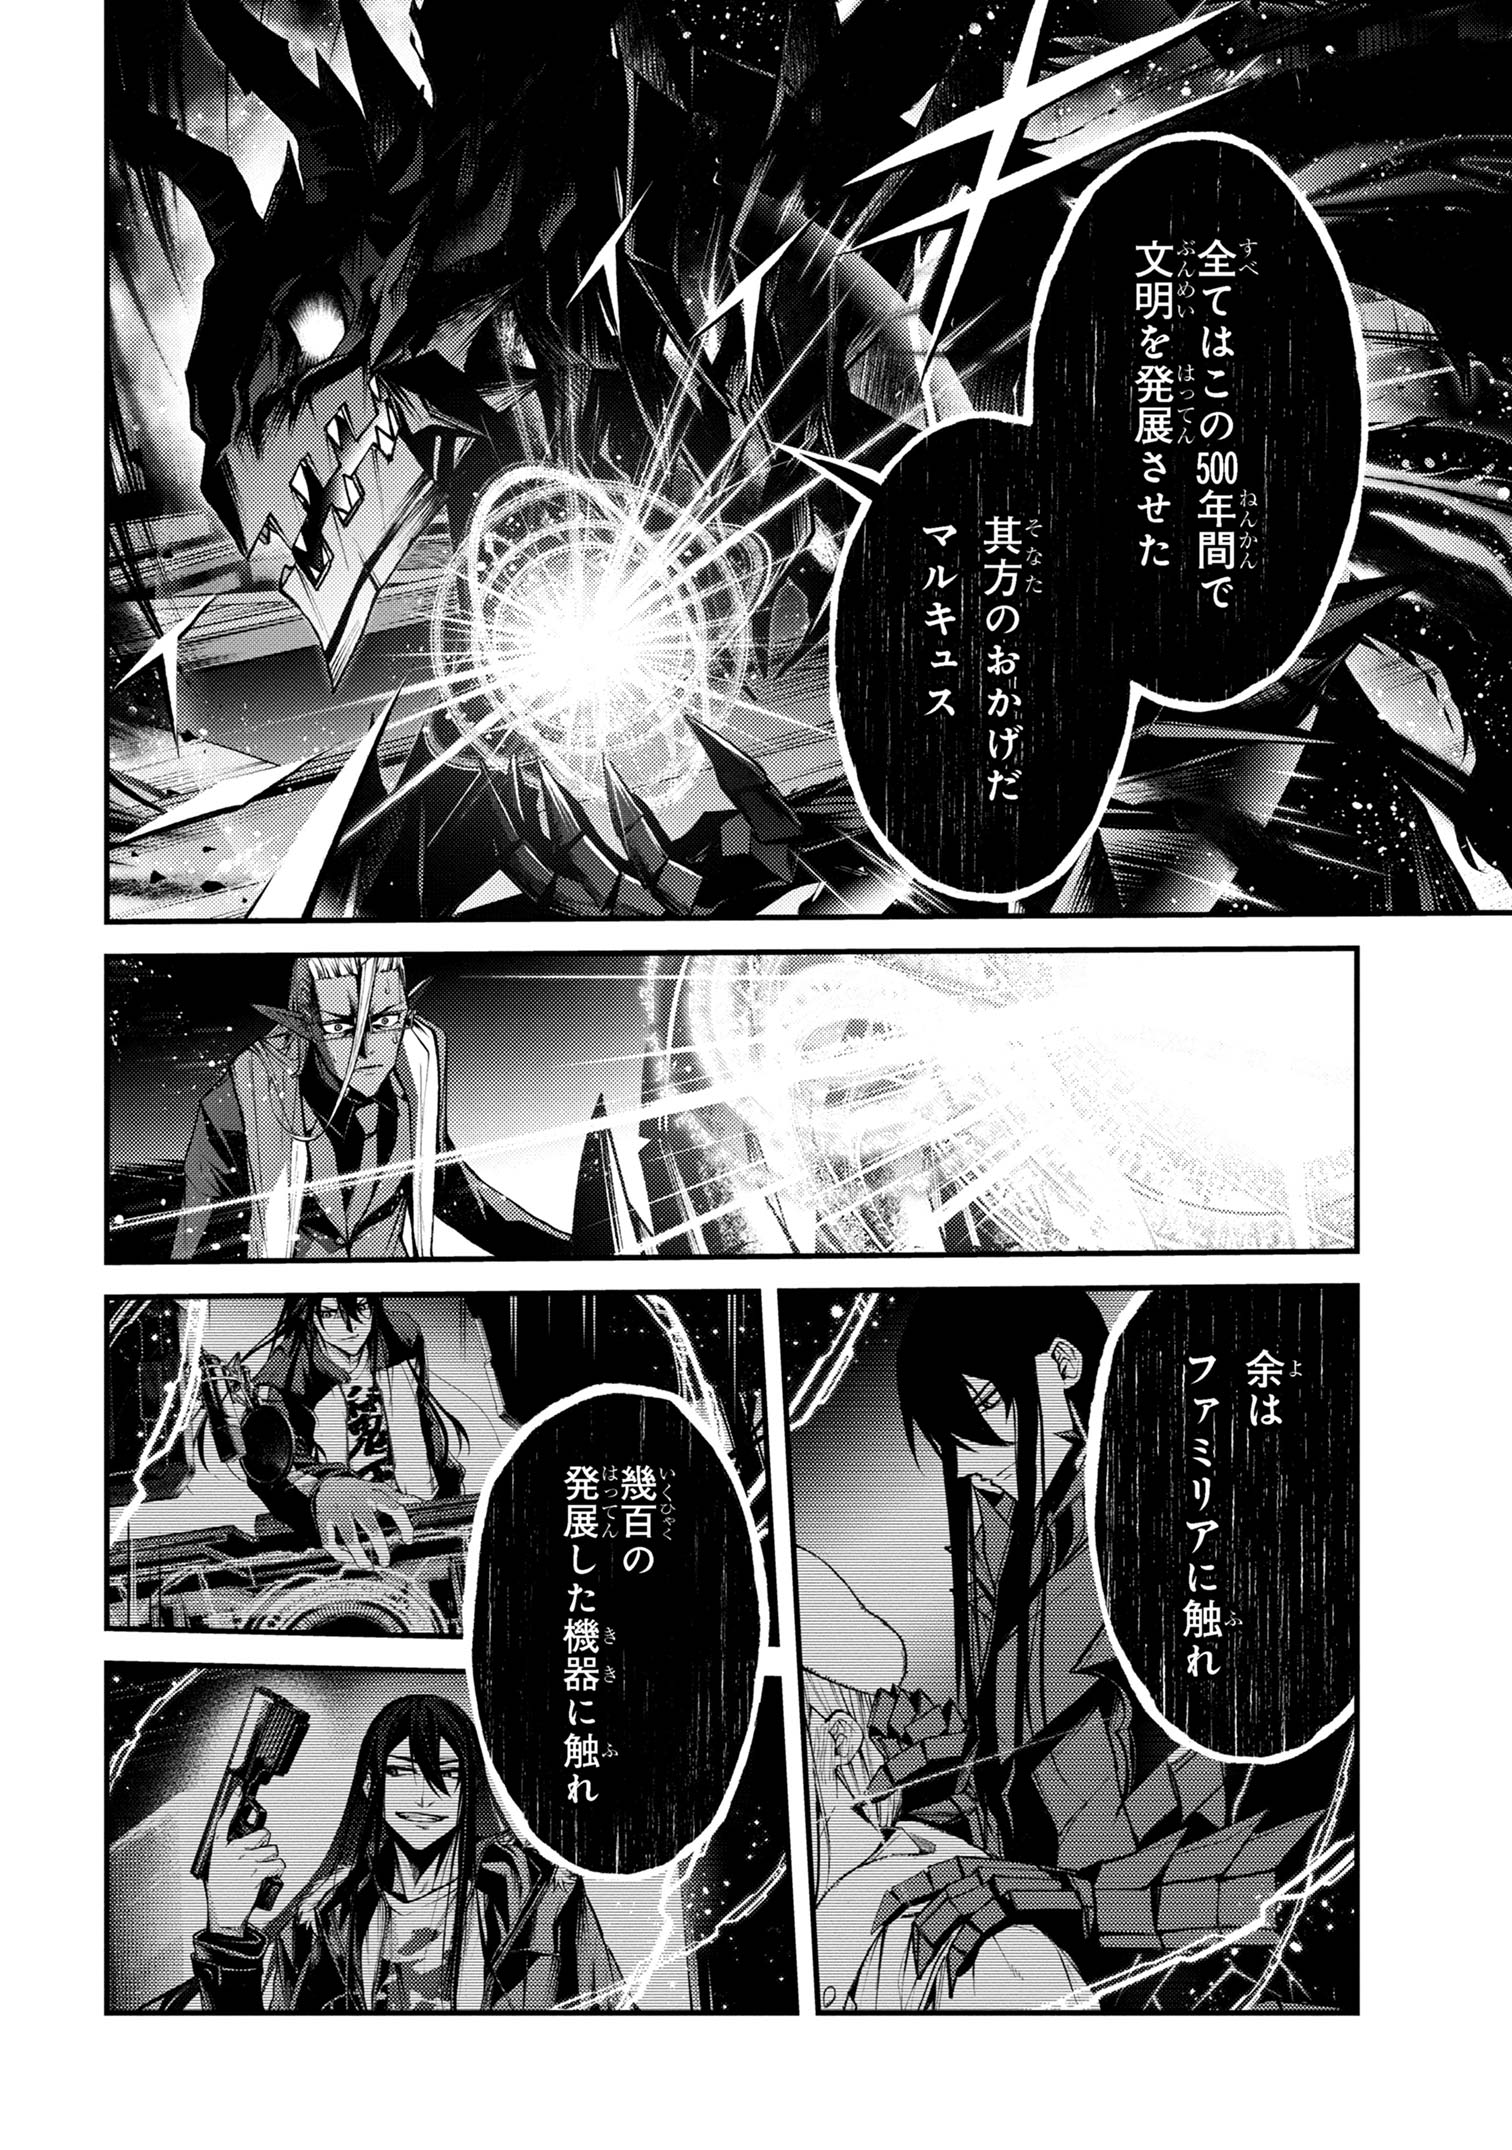 Maou 2099 - Chapter 14.1 - Page 12